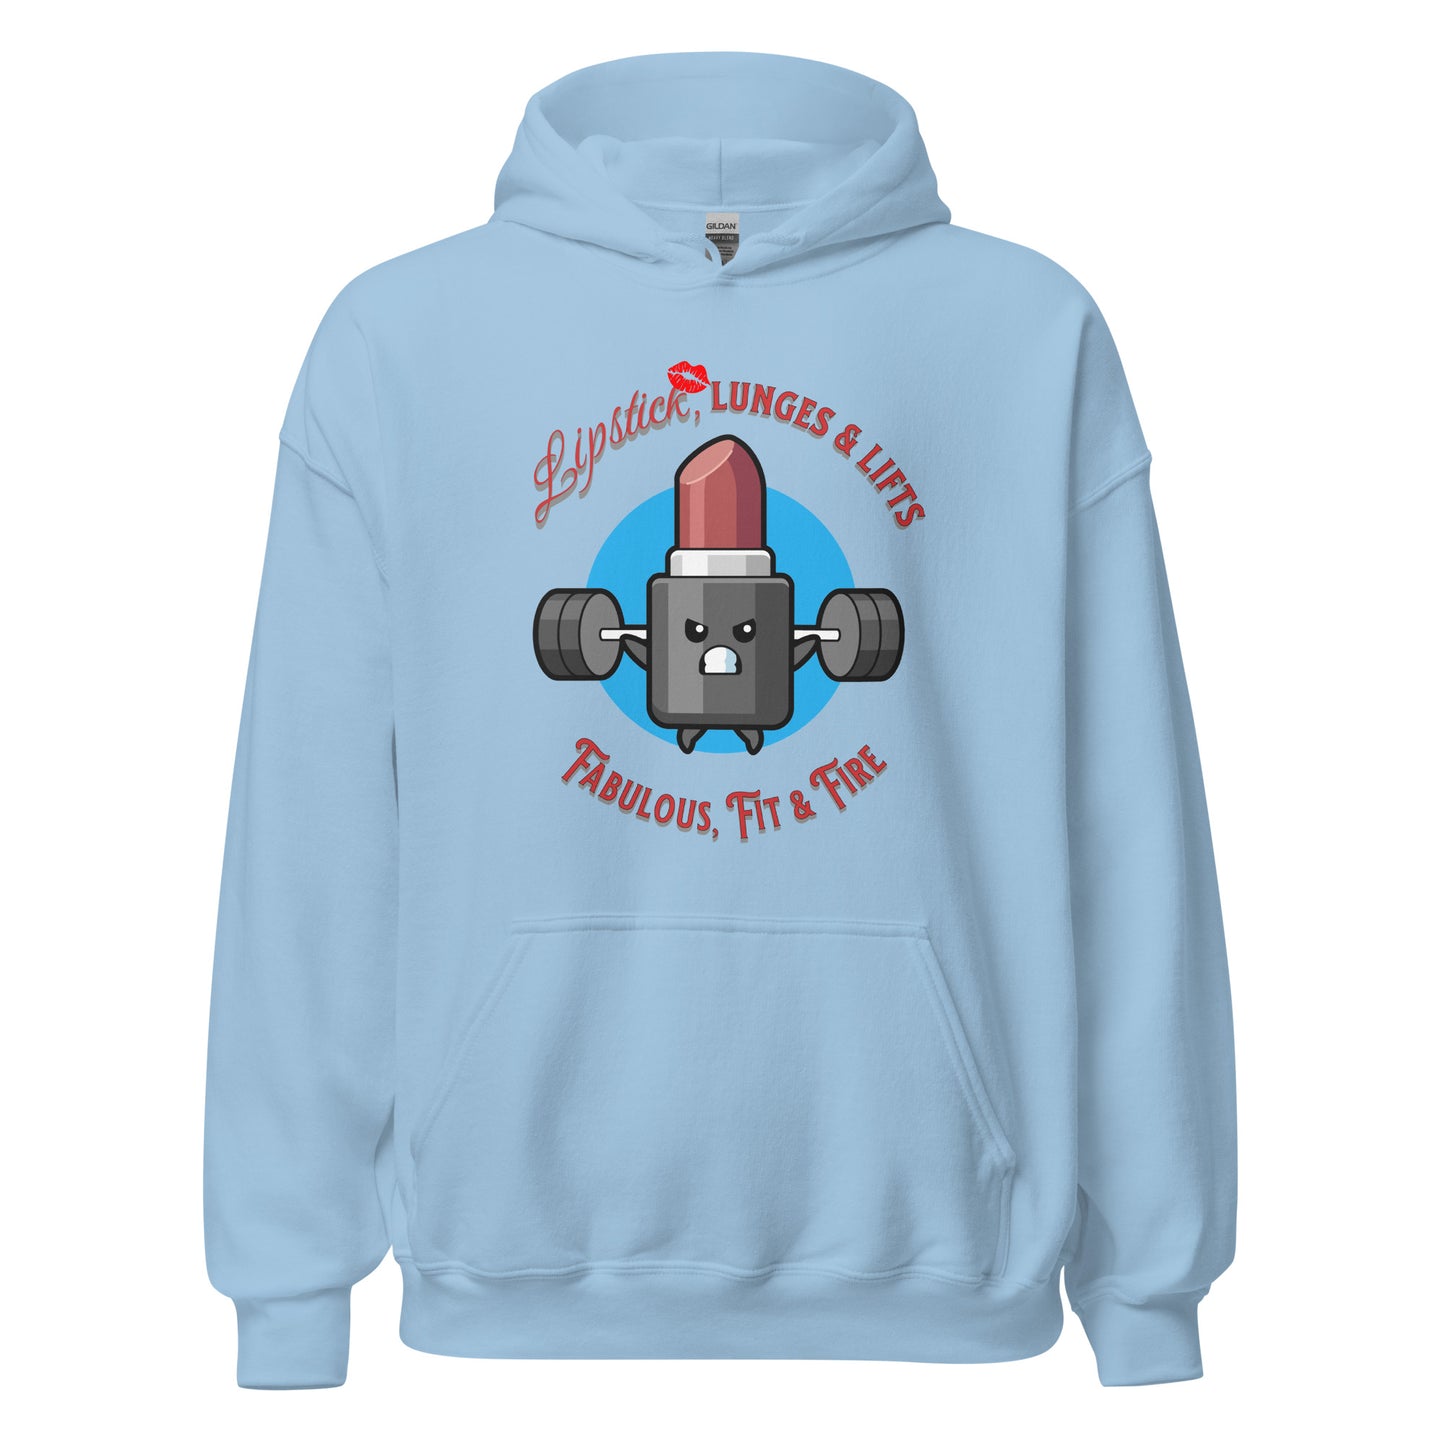 Lipstick, Lunges and Lifts Unisex Hoodie